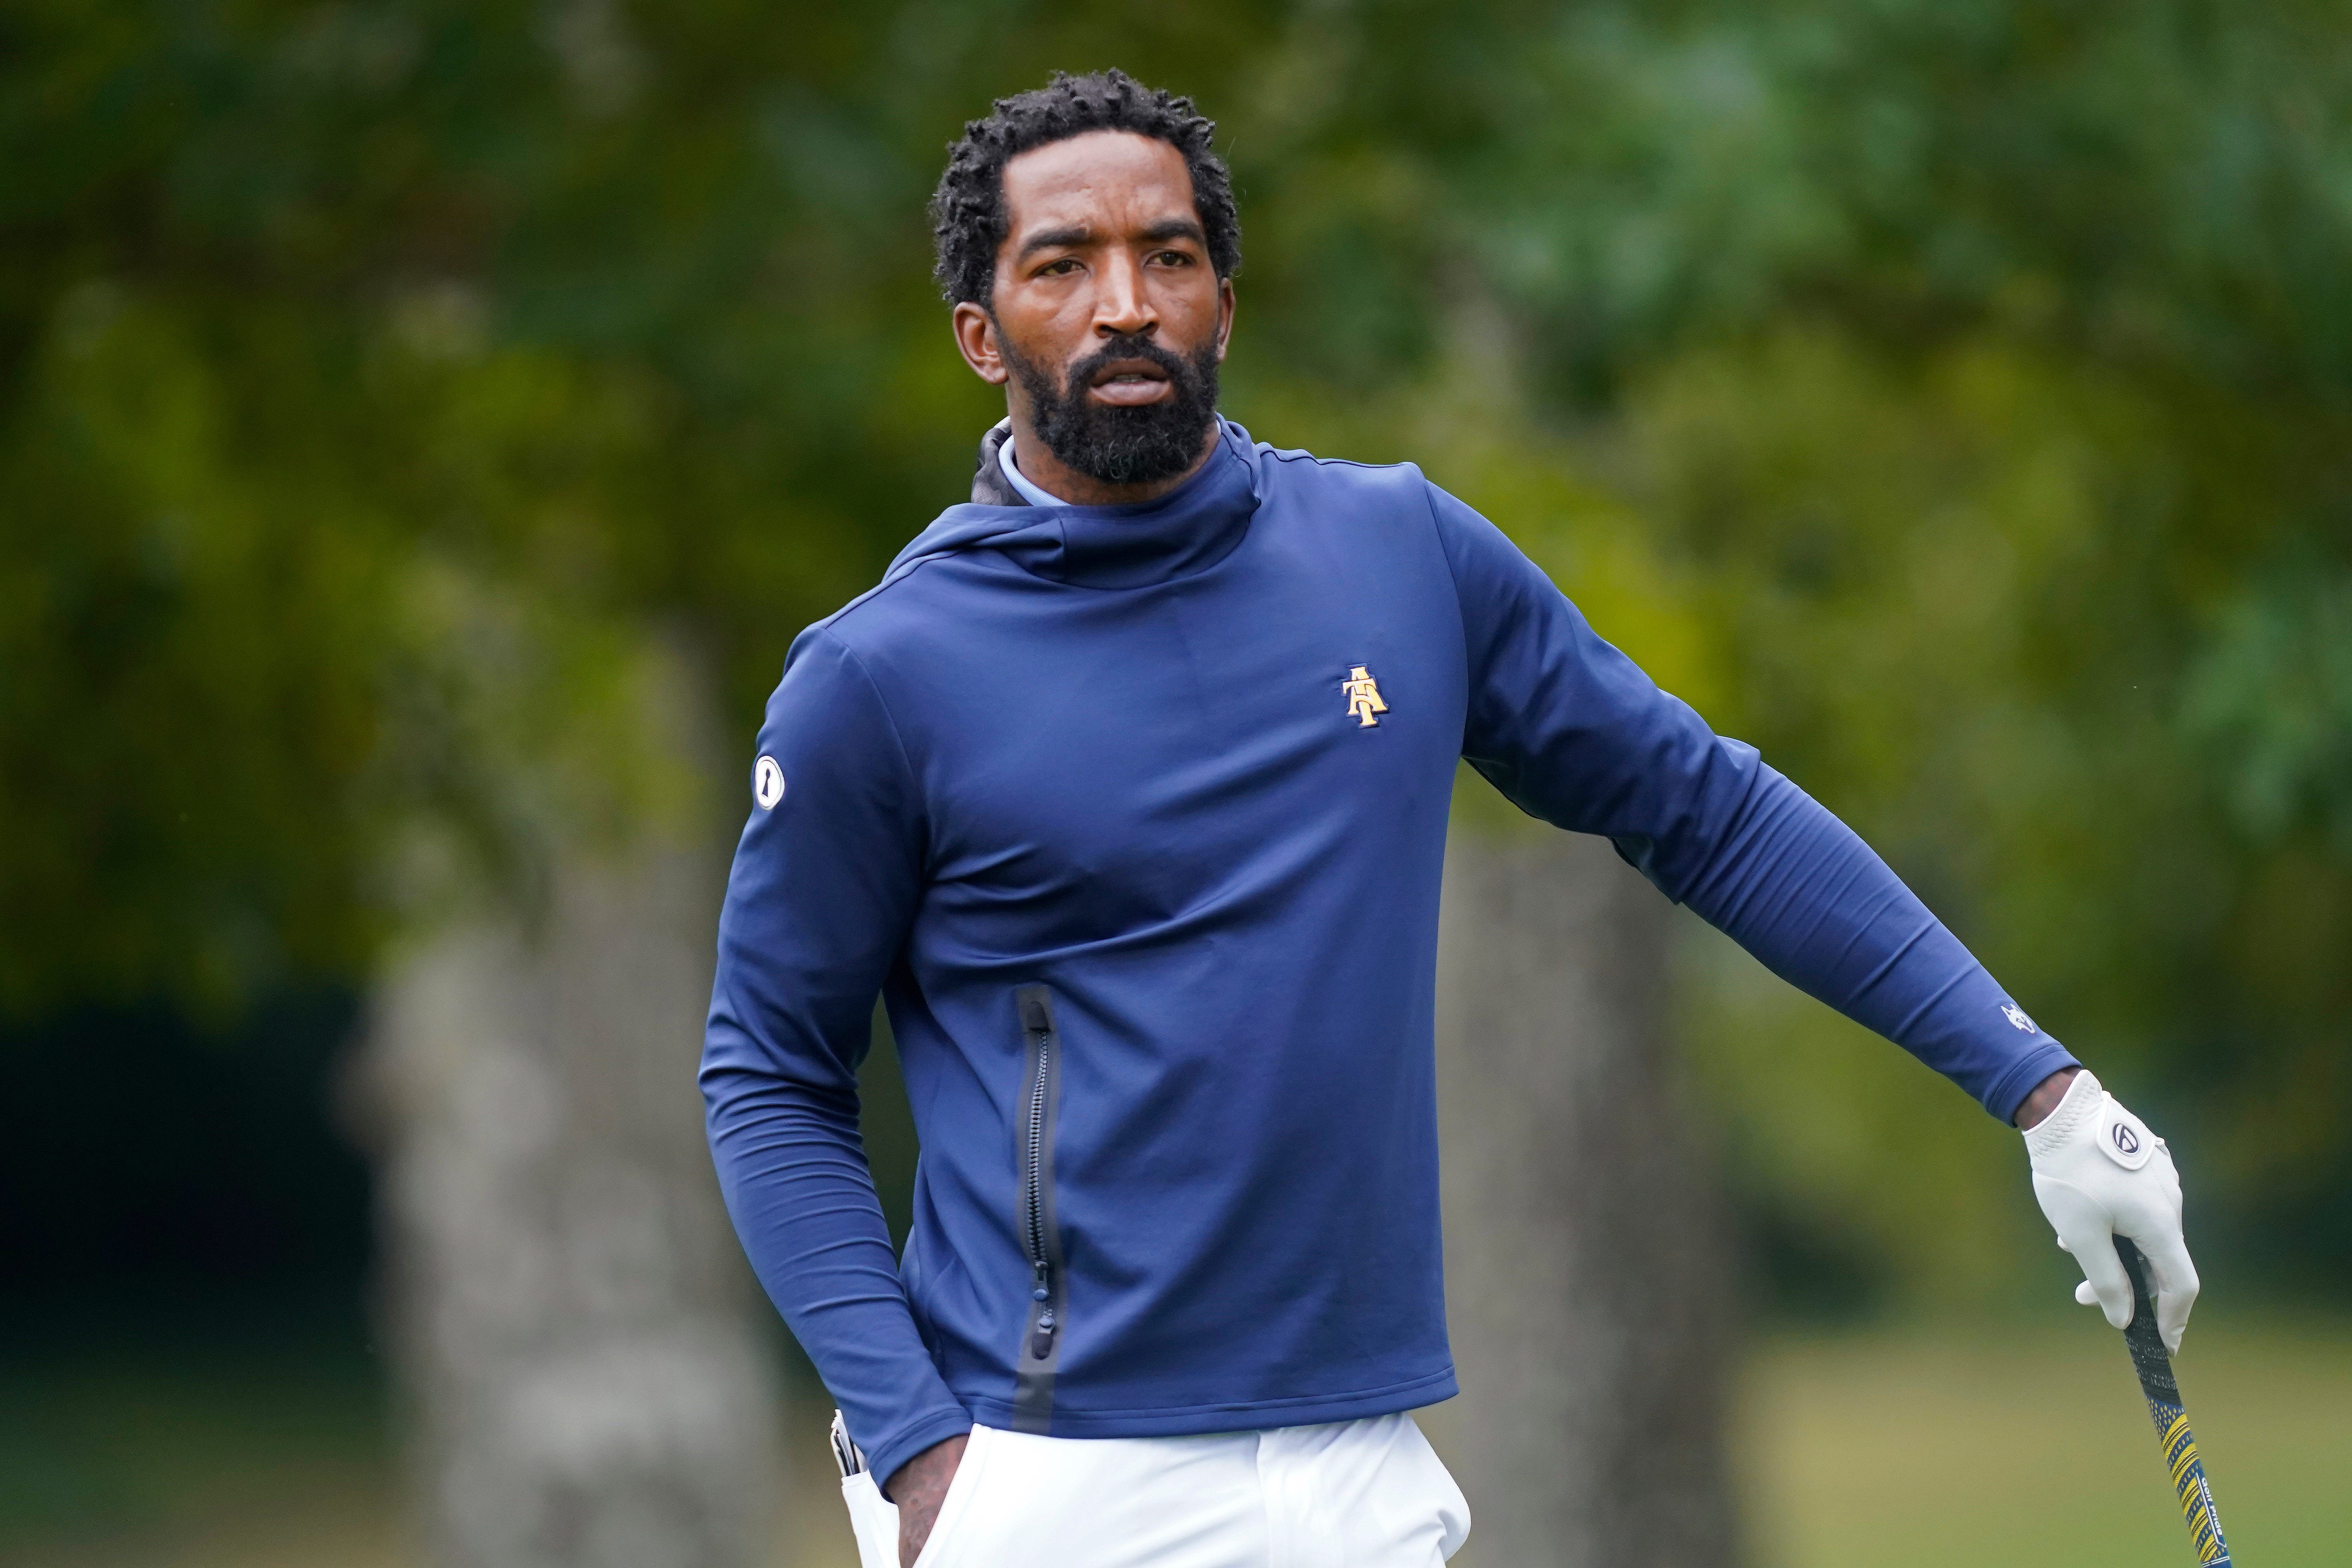 Ex-NBA player, current college golfer J.R. Smith signs with agent for NIL deals